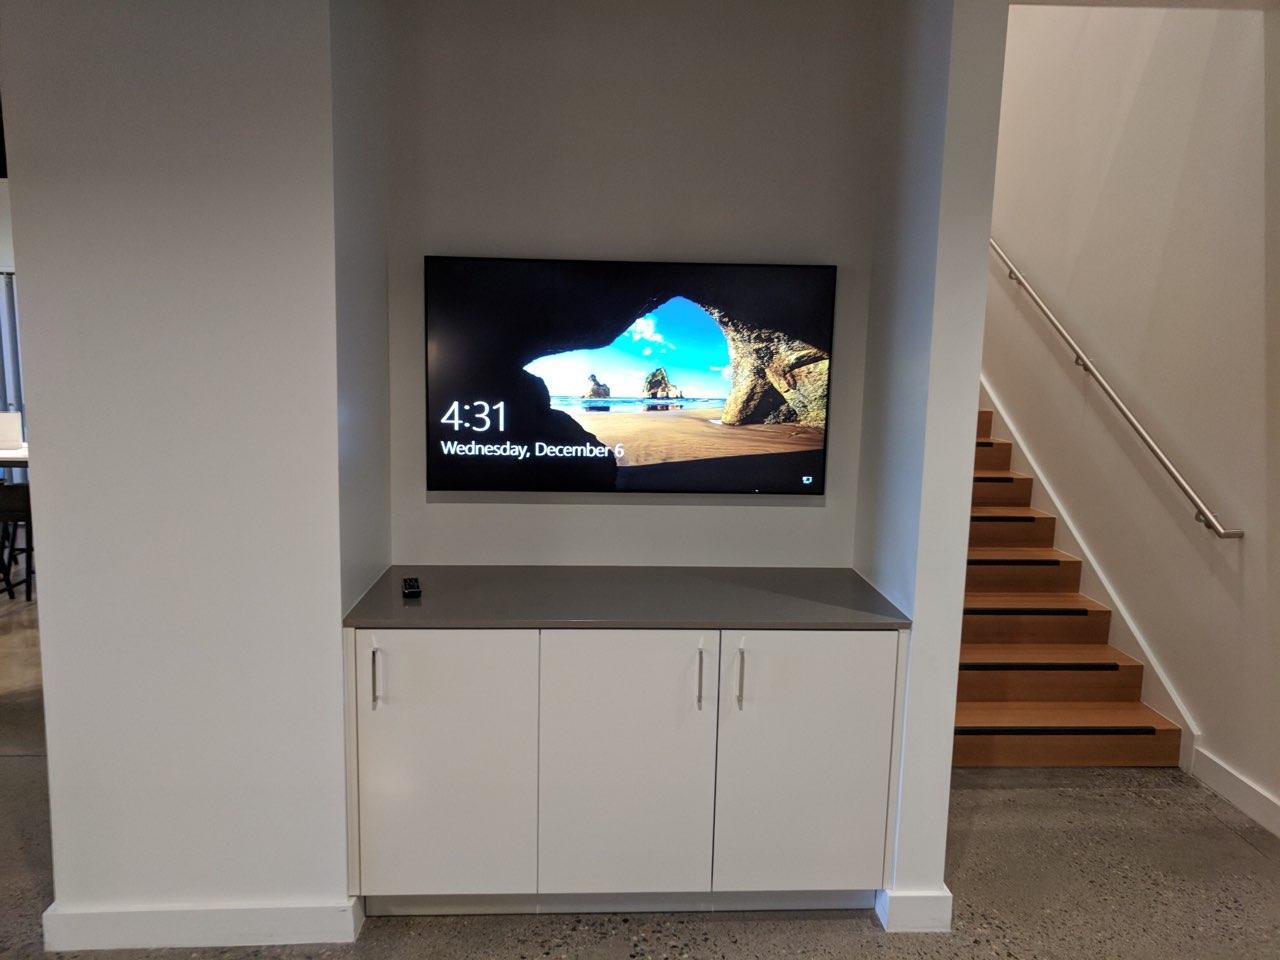 Business Television Installation with Wires Hidden